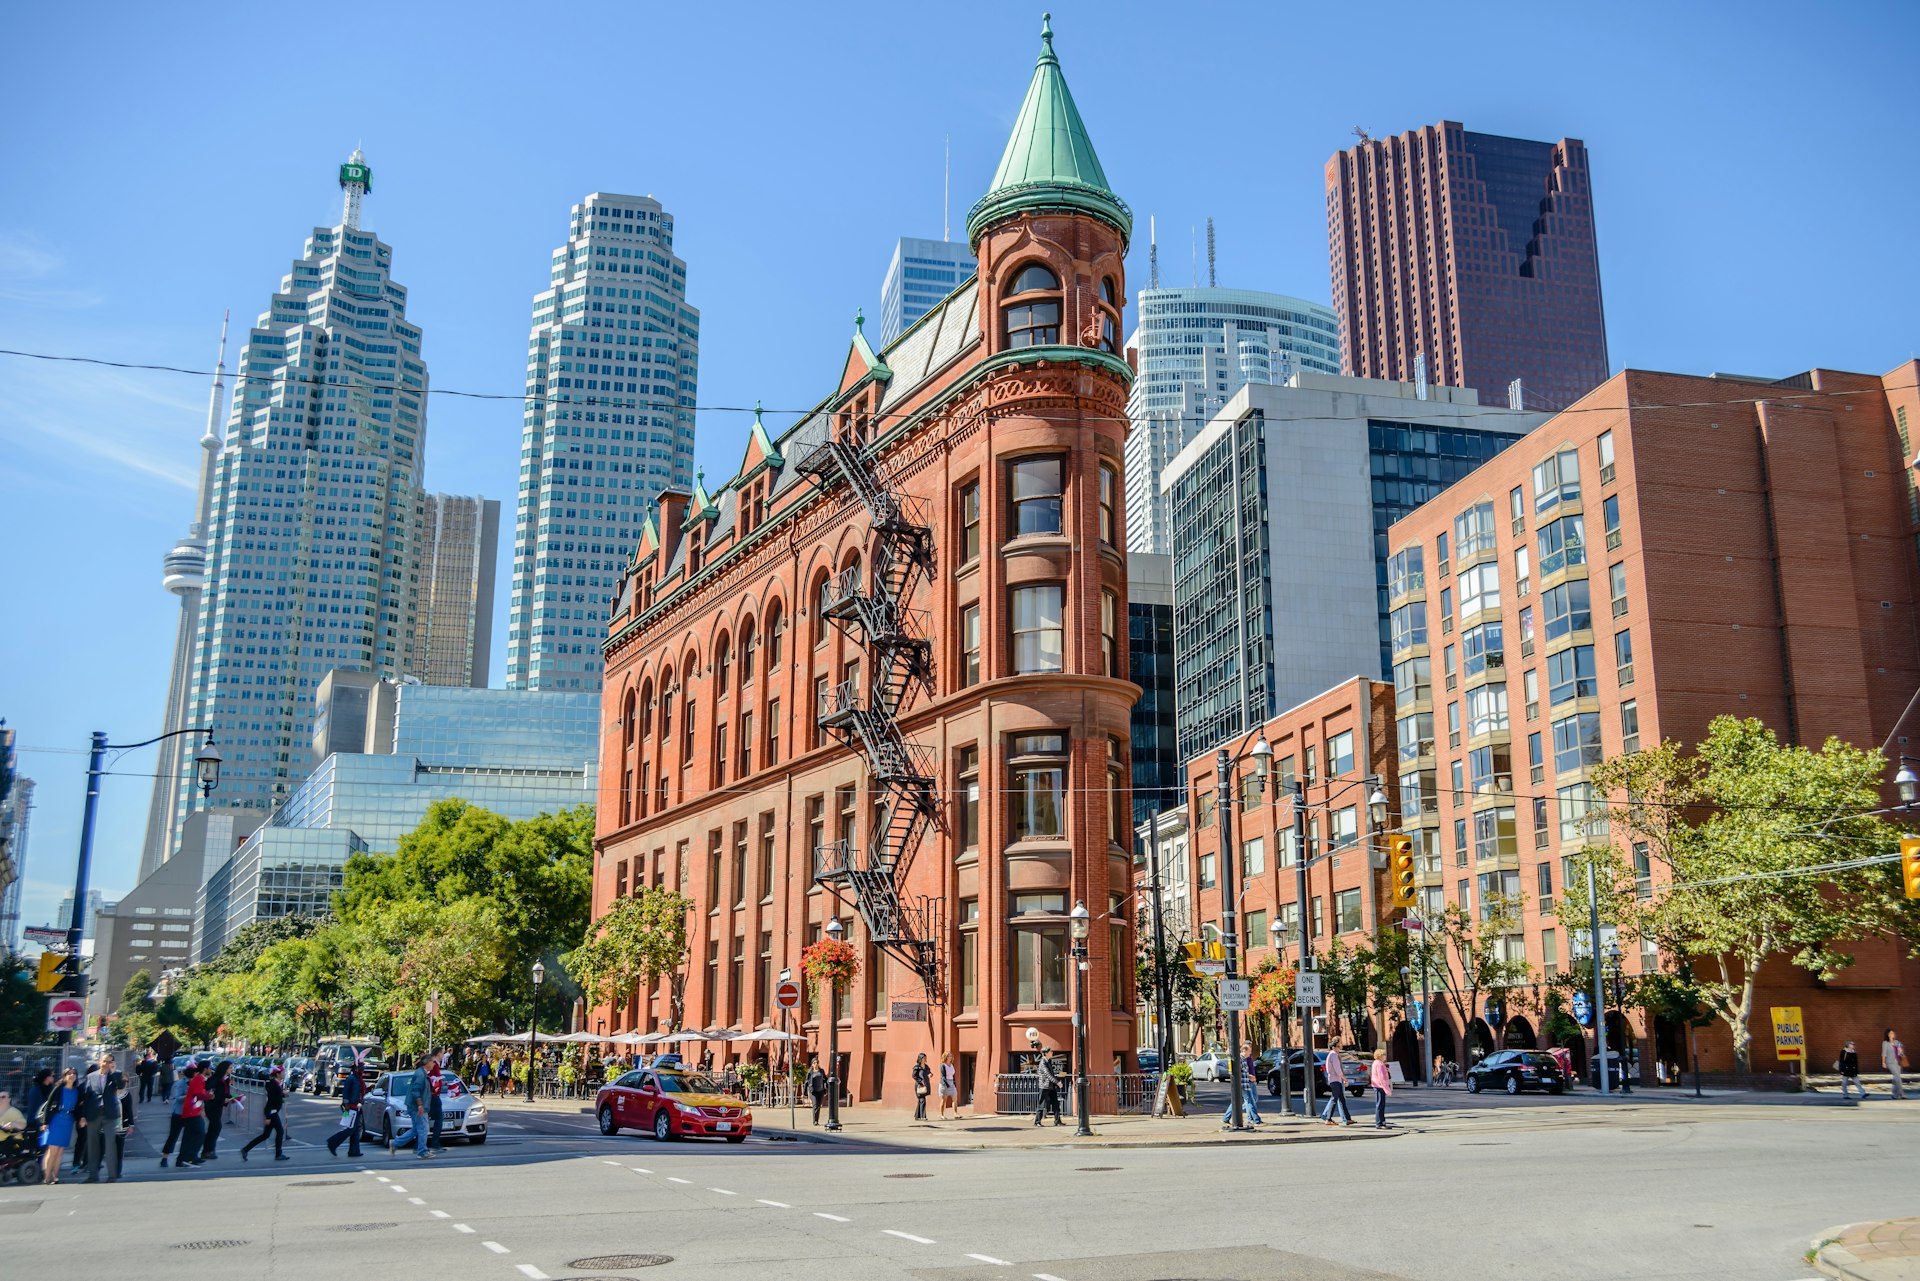 People walk in the Gooderham building area, a Victorian historic building surrounded by the financial district in Toronto,